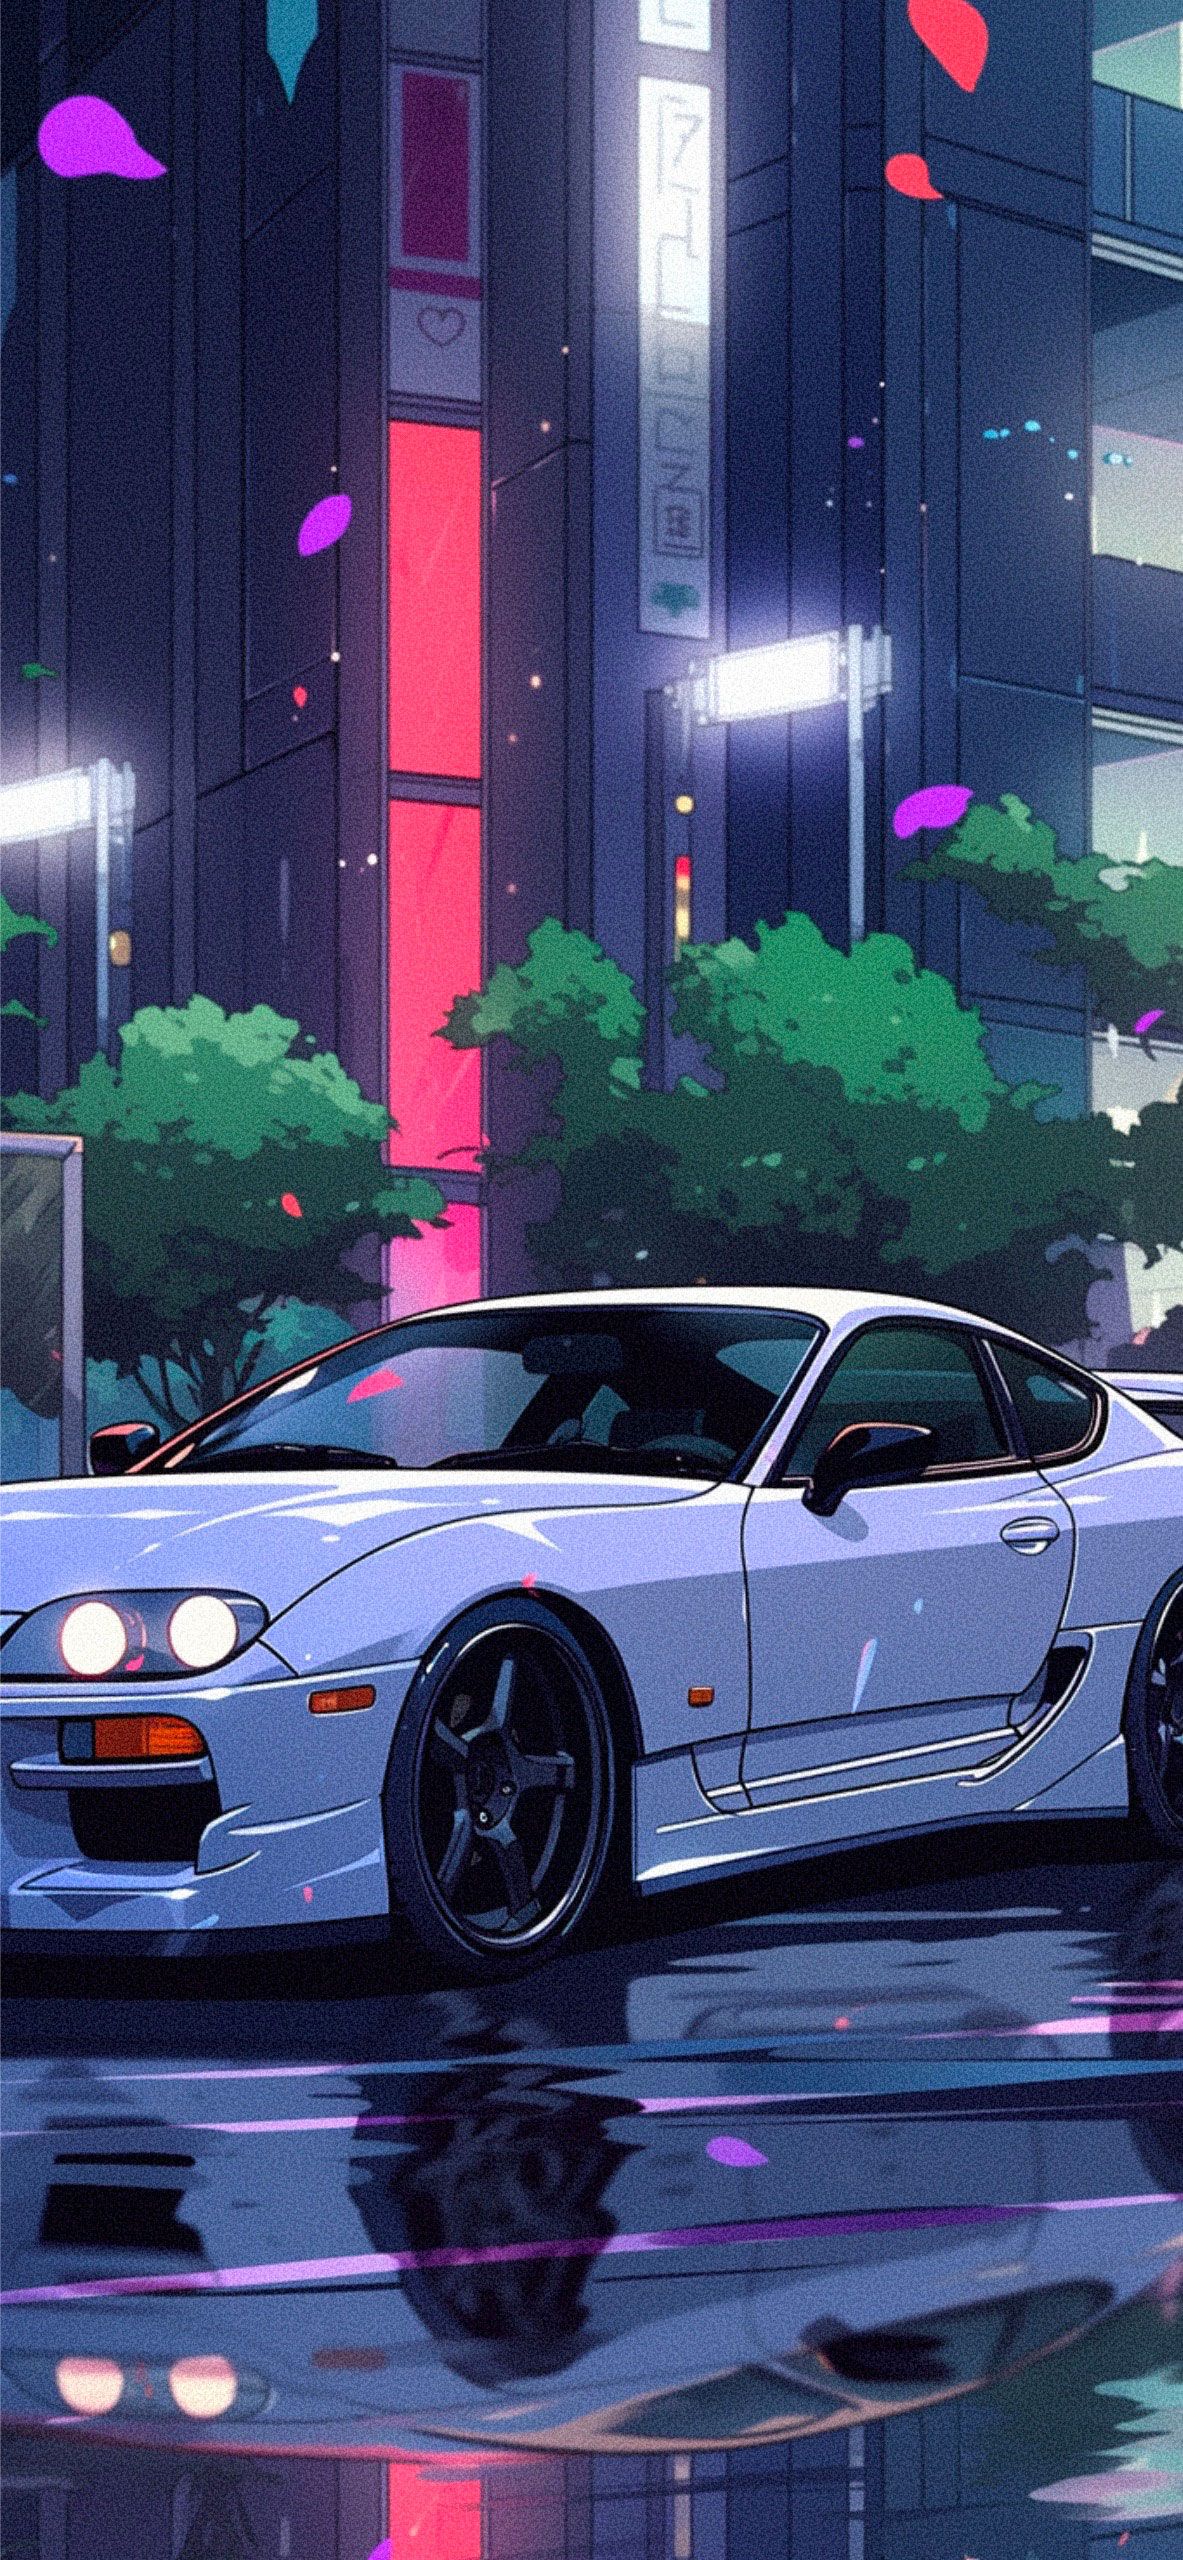 Aesthetic anime car wallpaper for iPhone with high-resolution 1080x1920 pixel. You can use this wallpaper for your iPhone 5, 6, 7, 8, X, XS, XR backgrounds, Mobile Screensaver, or iPad Lock Screen - Cars